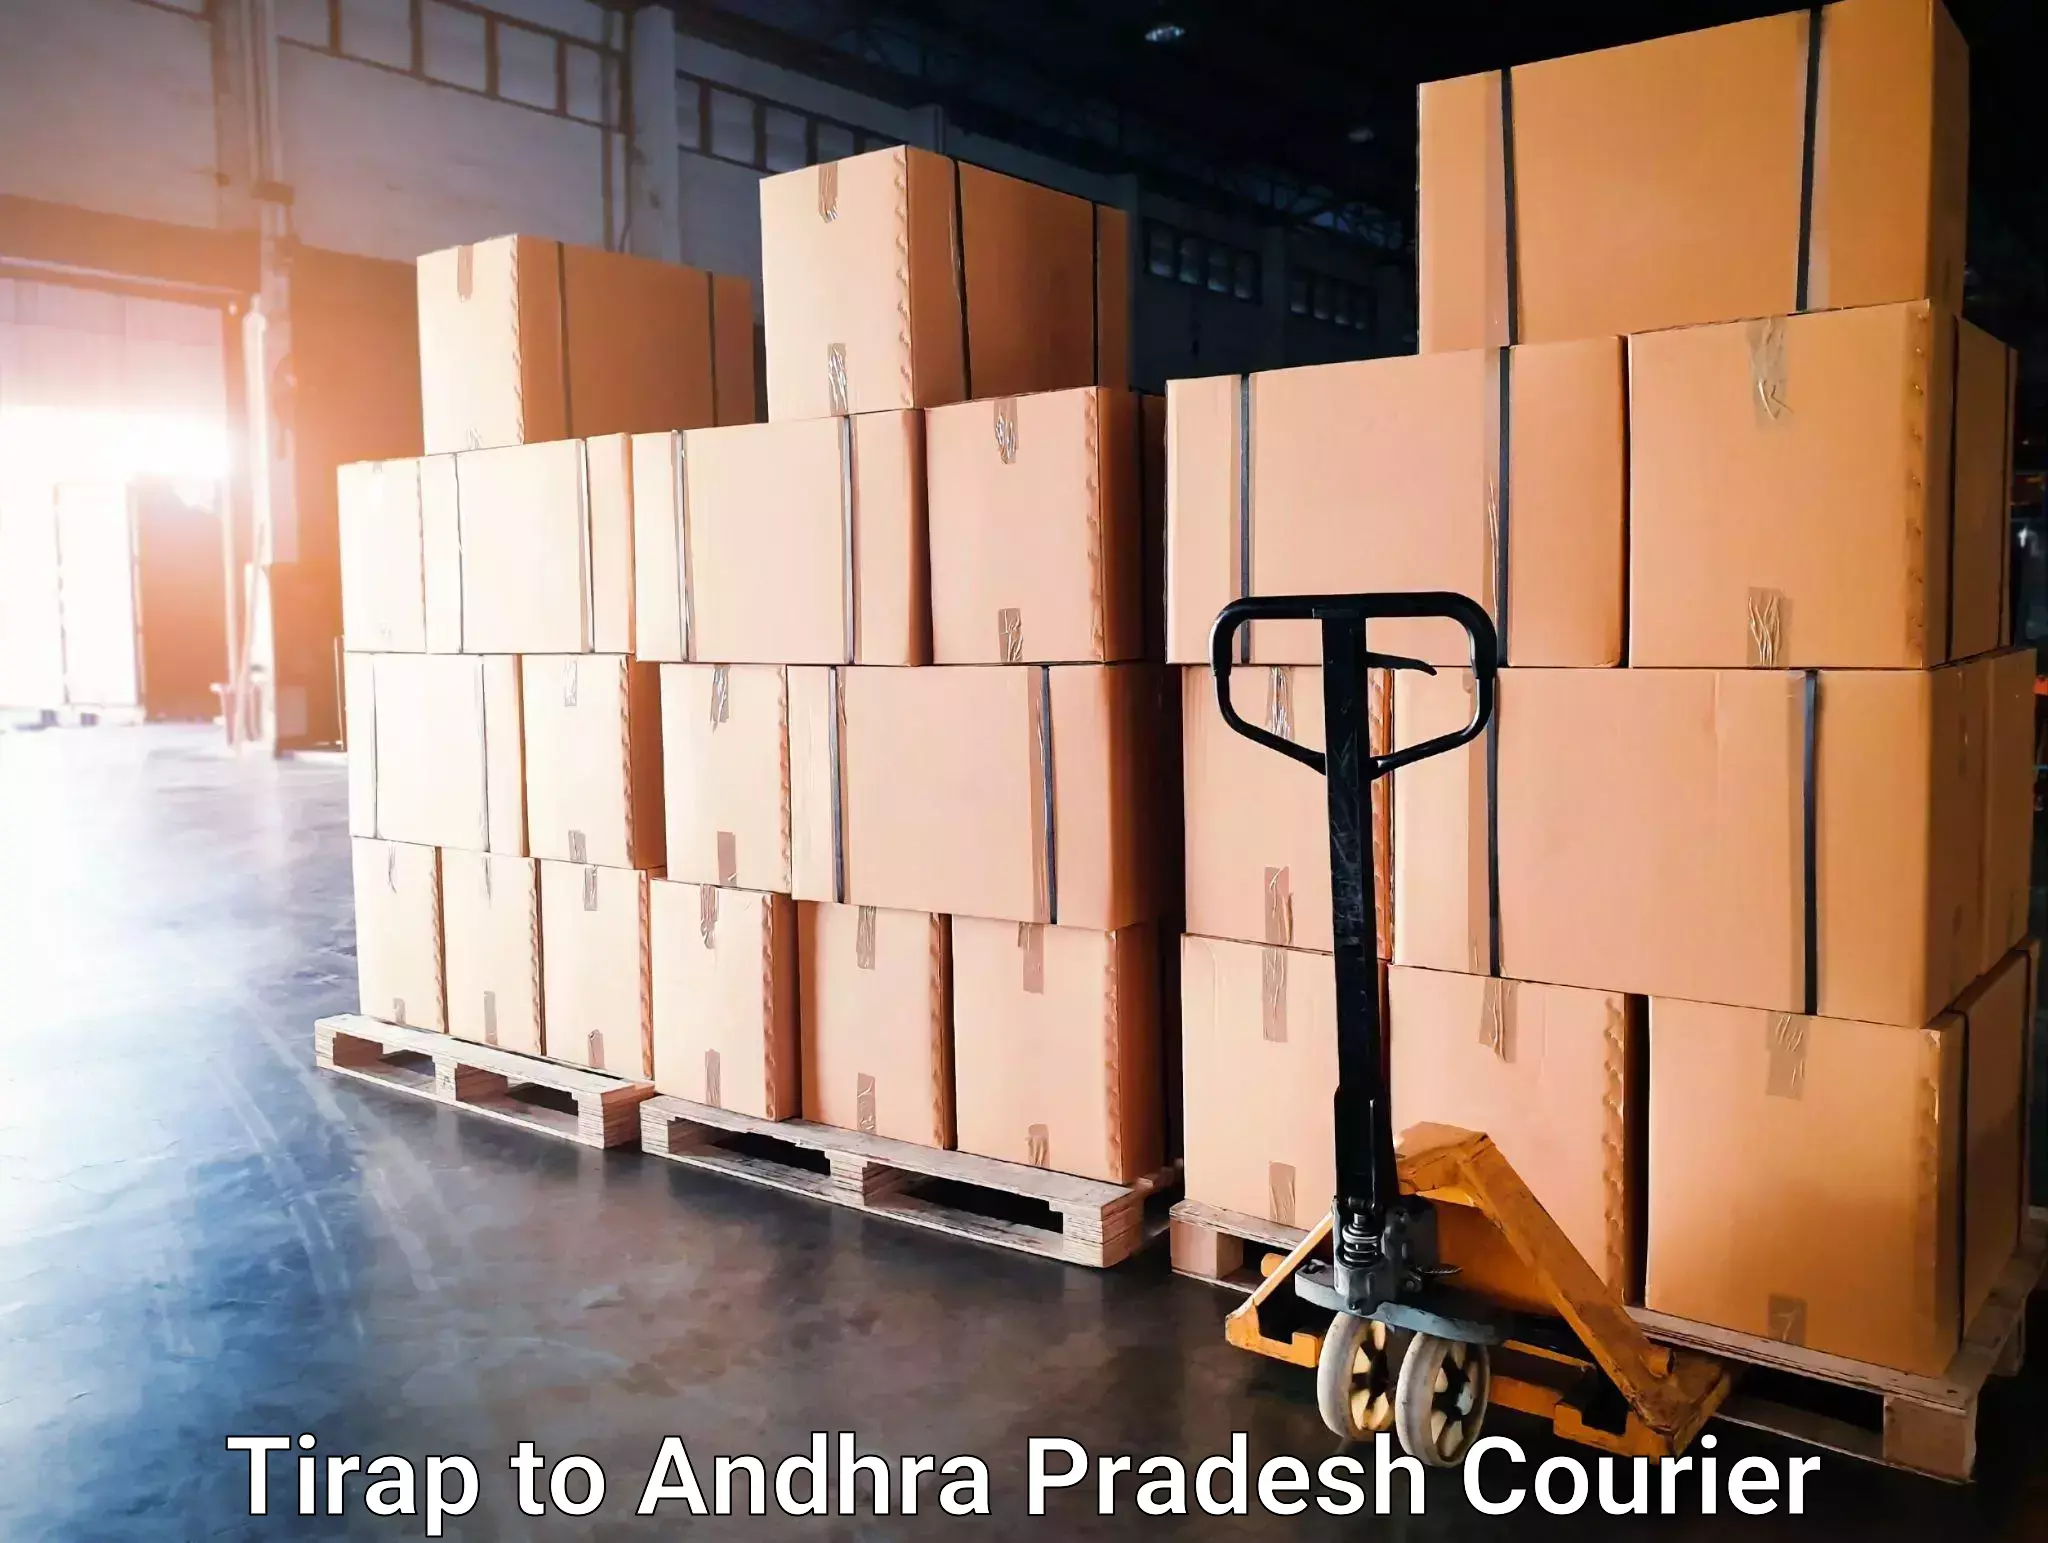 Flexible delivery scheduling in Tirap to Gudivada